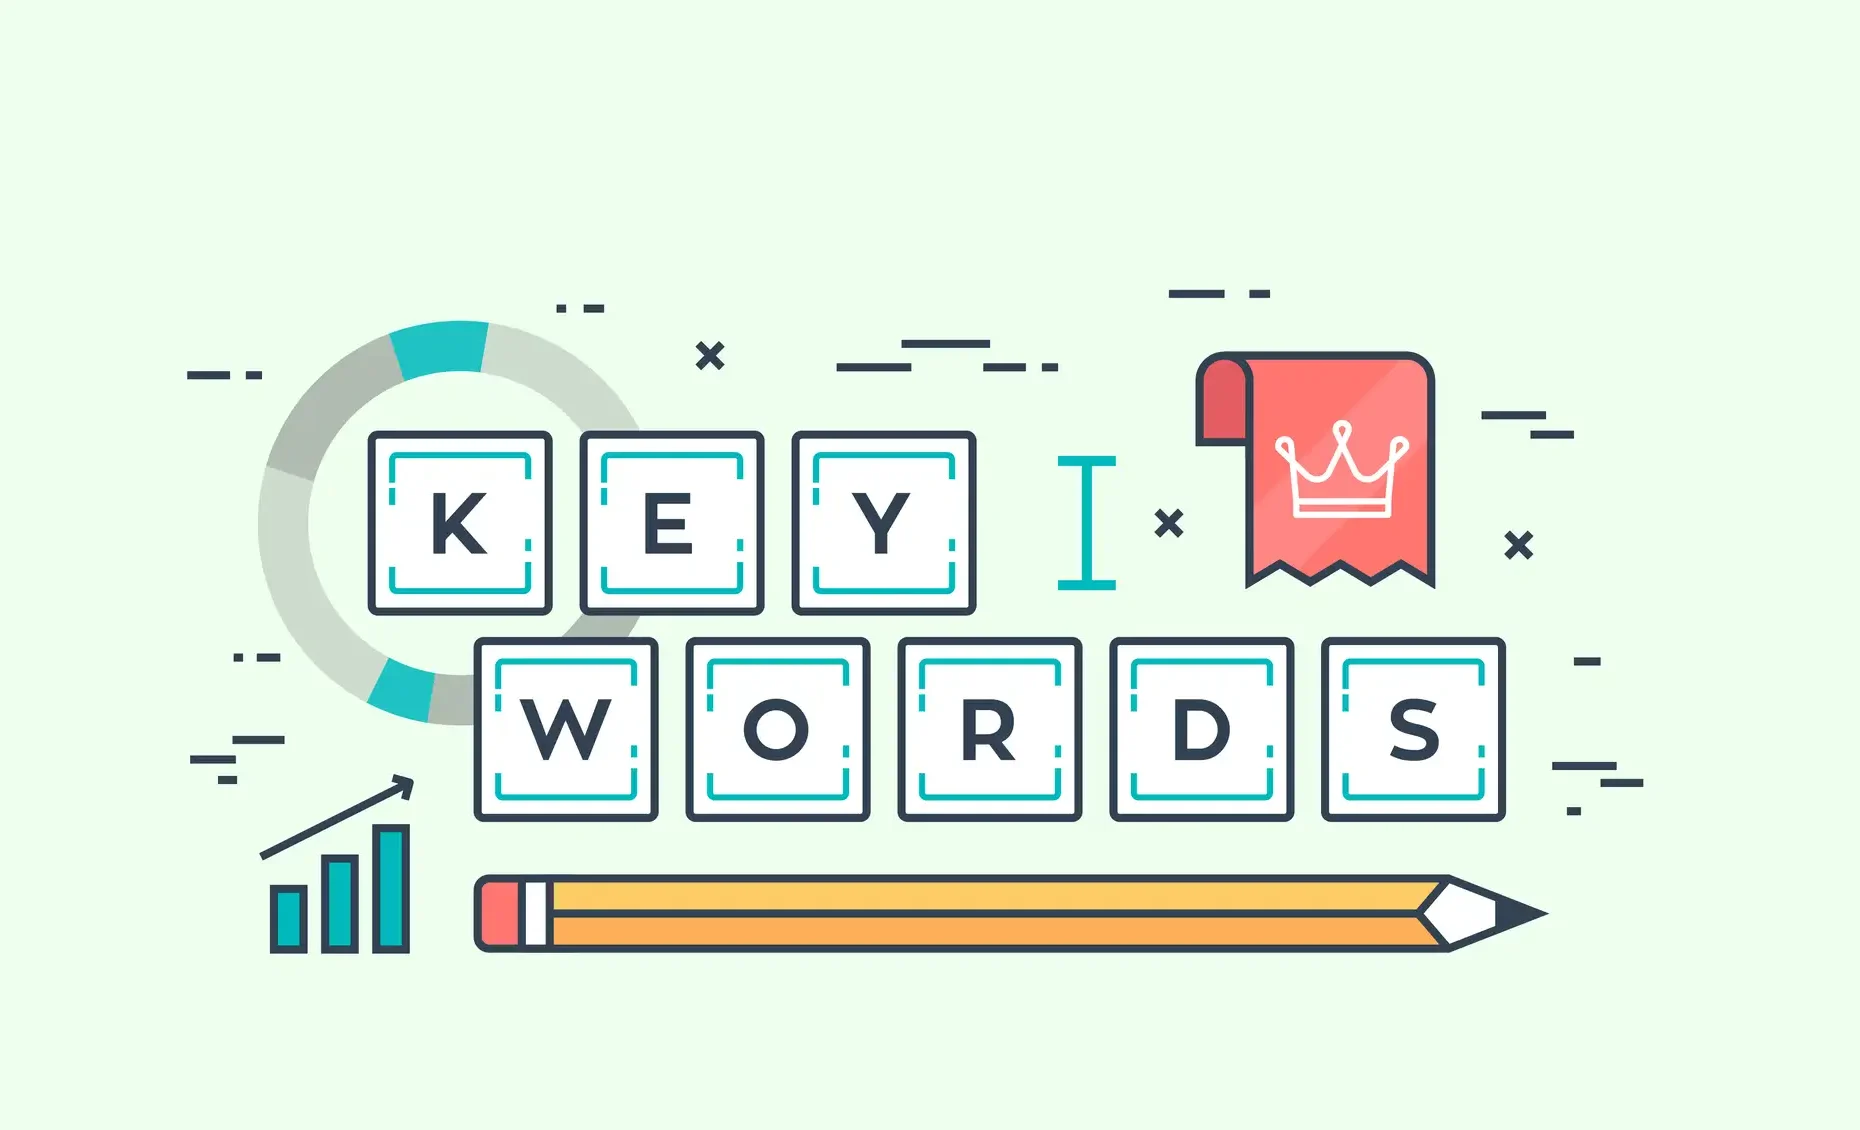 The Role of Keywords in SEO